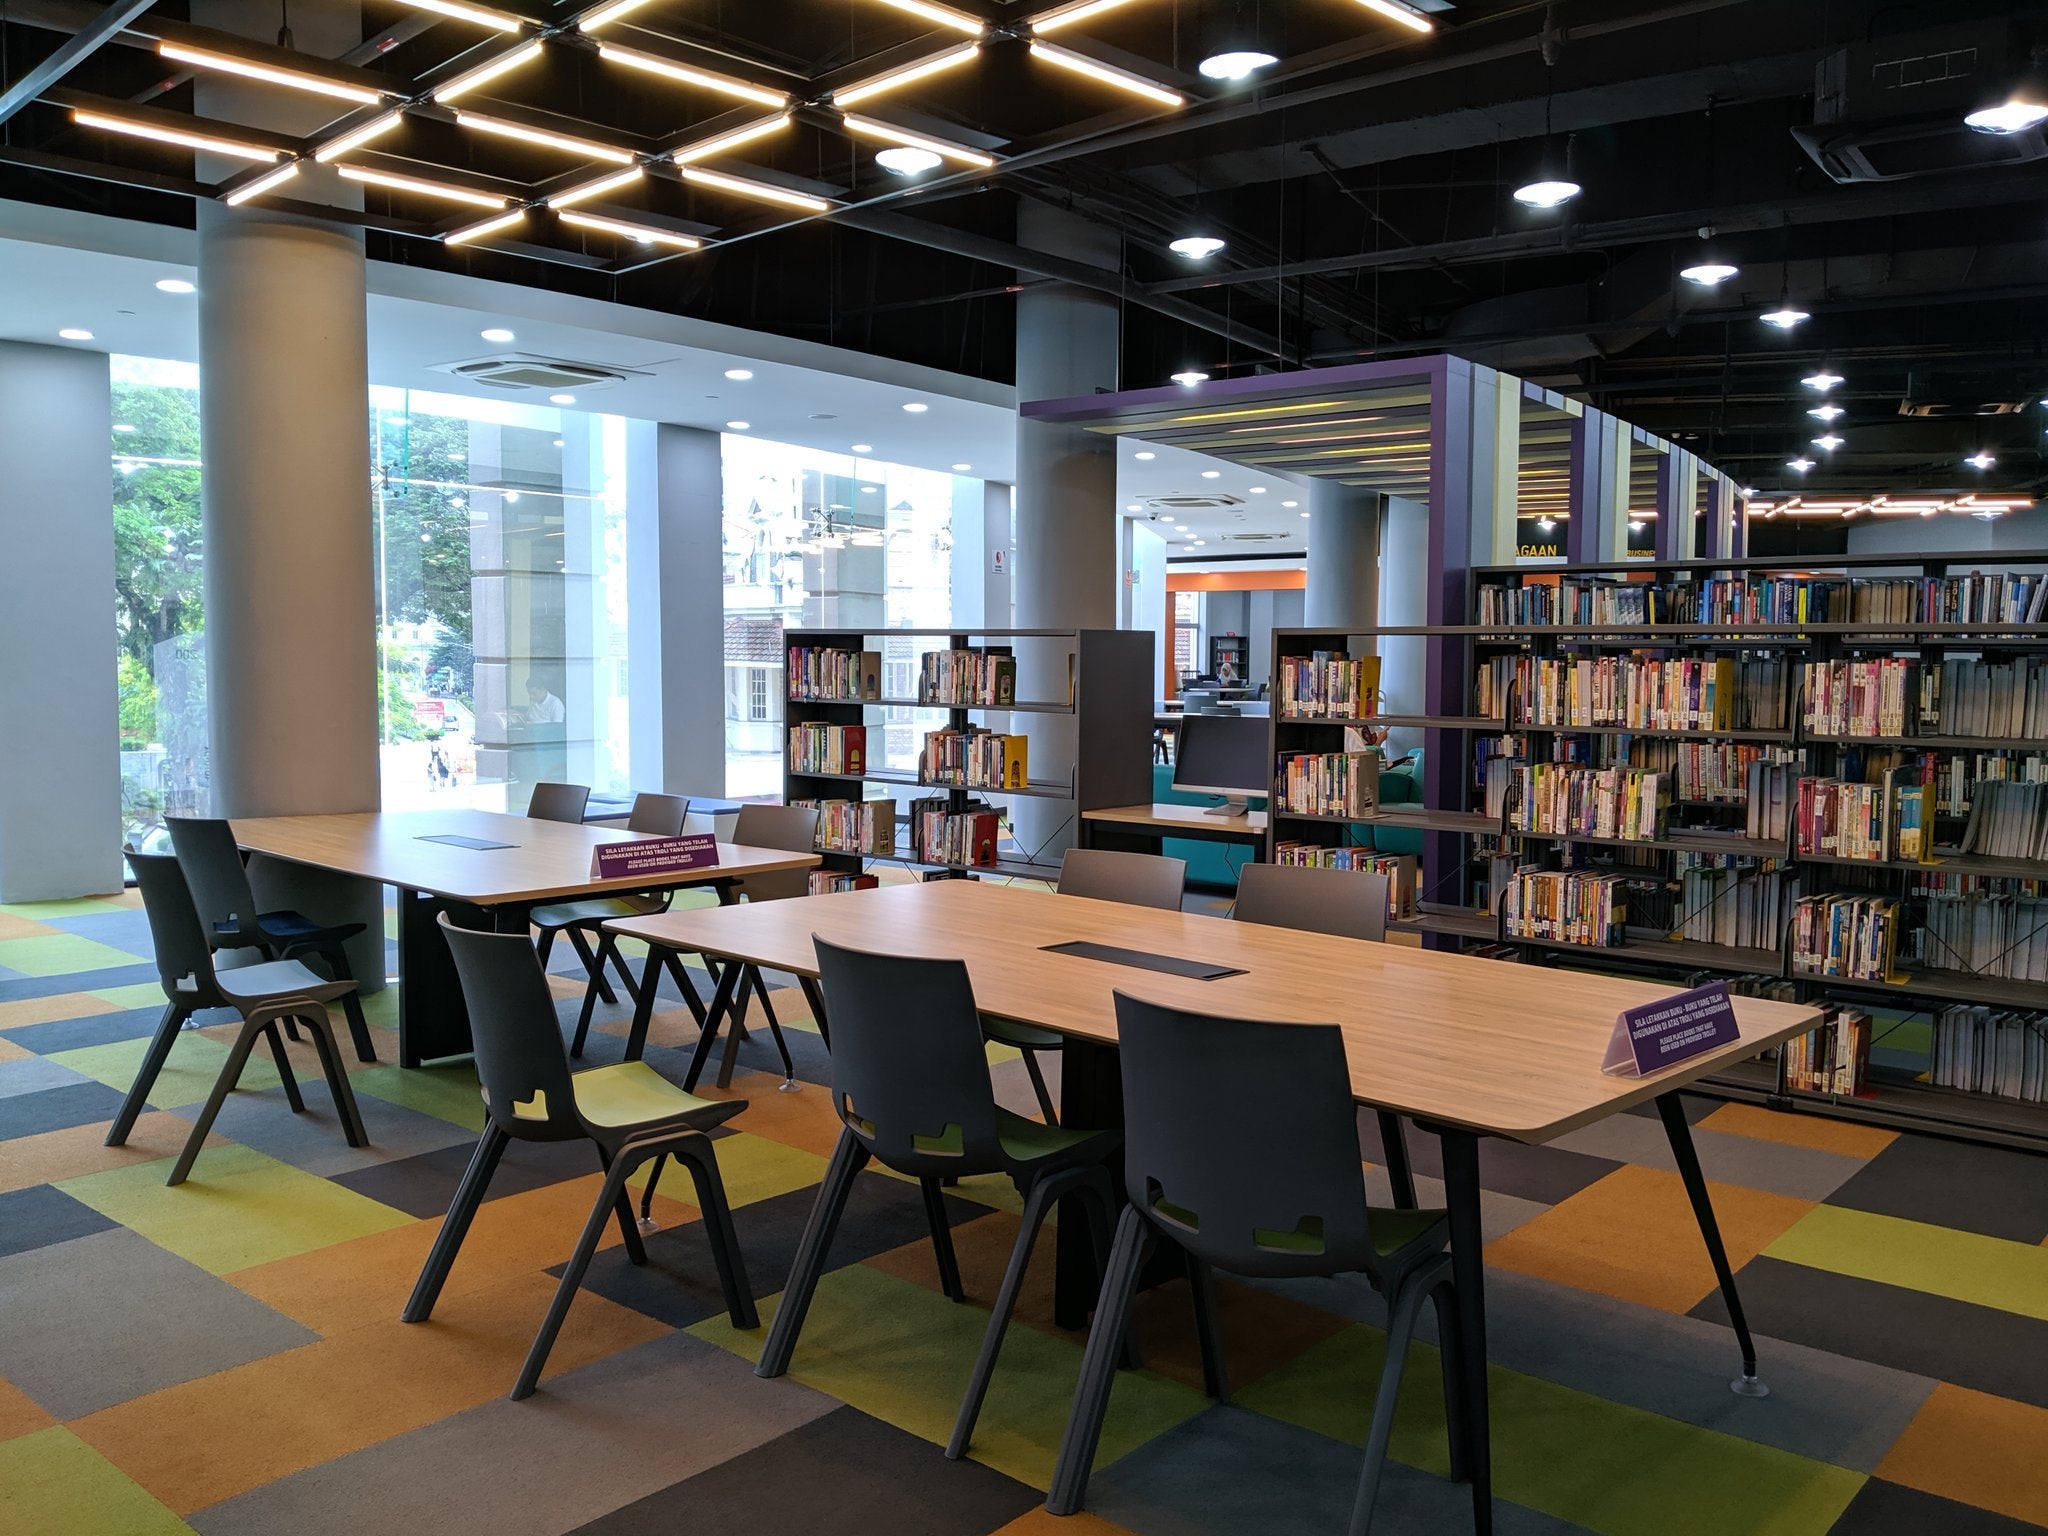 Don't Know Where To Go For A Date? How About The KL Library Where Everything Is Free! - WORLD OF BUZZ 6